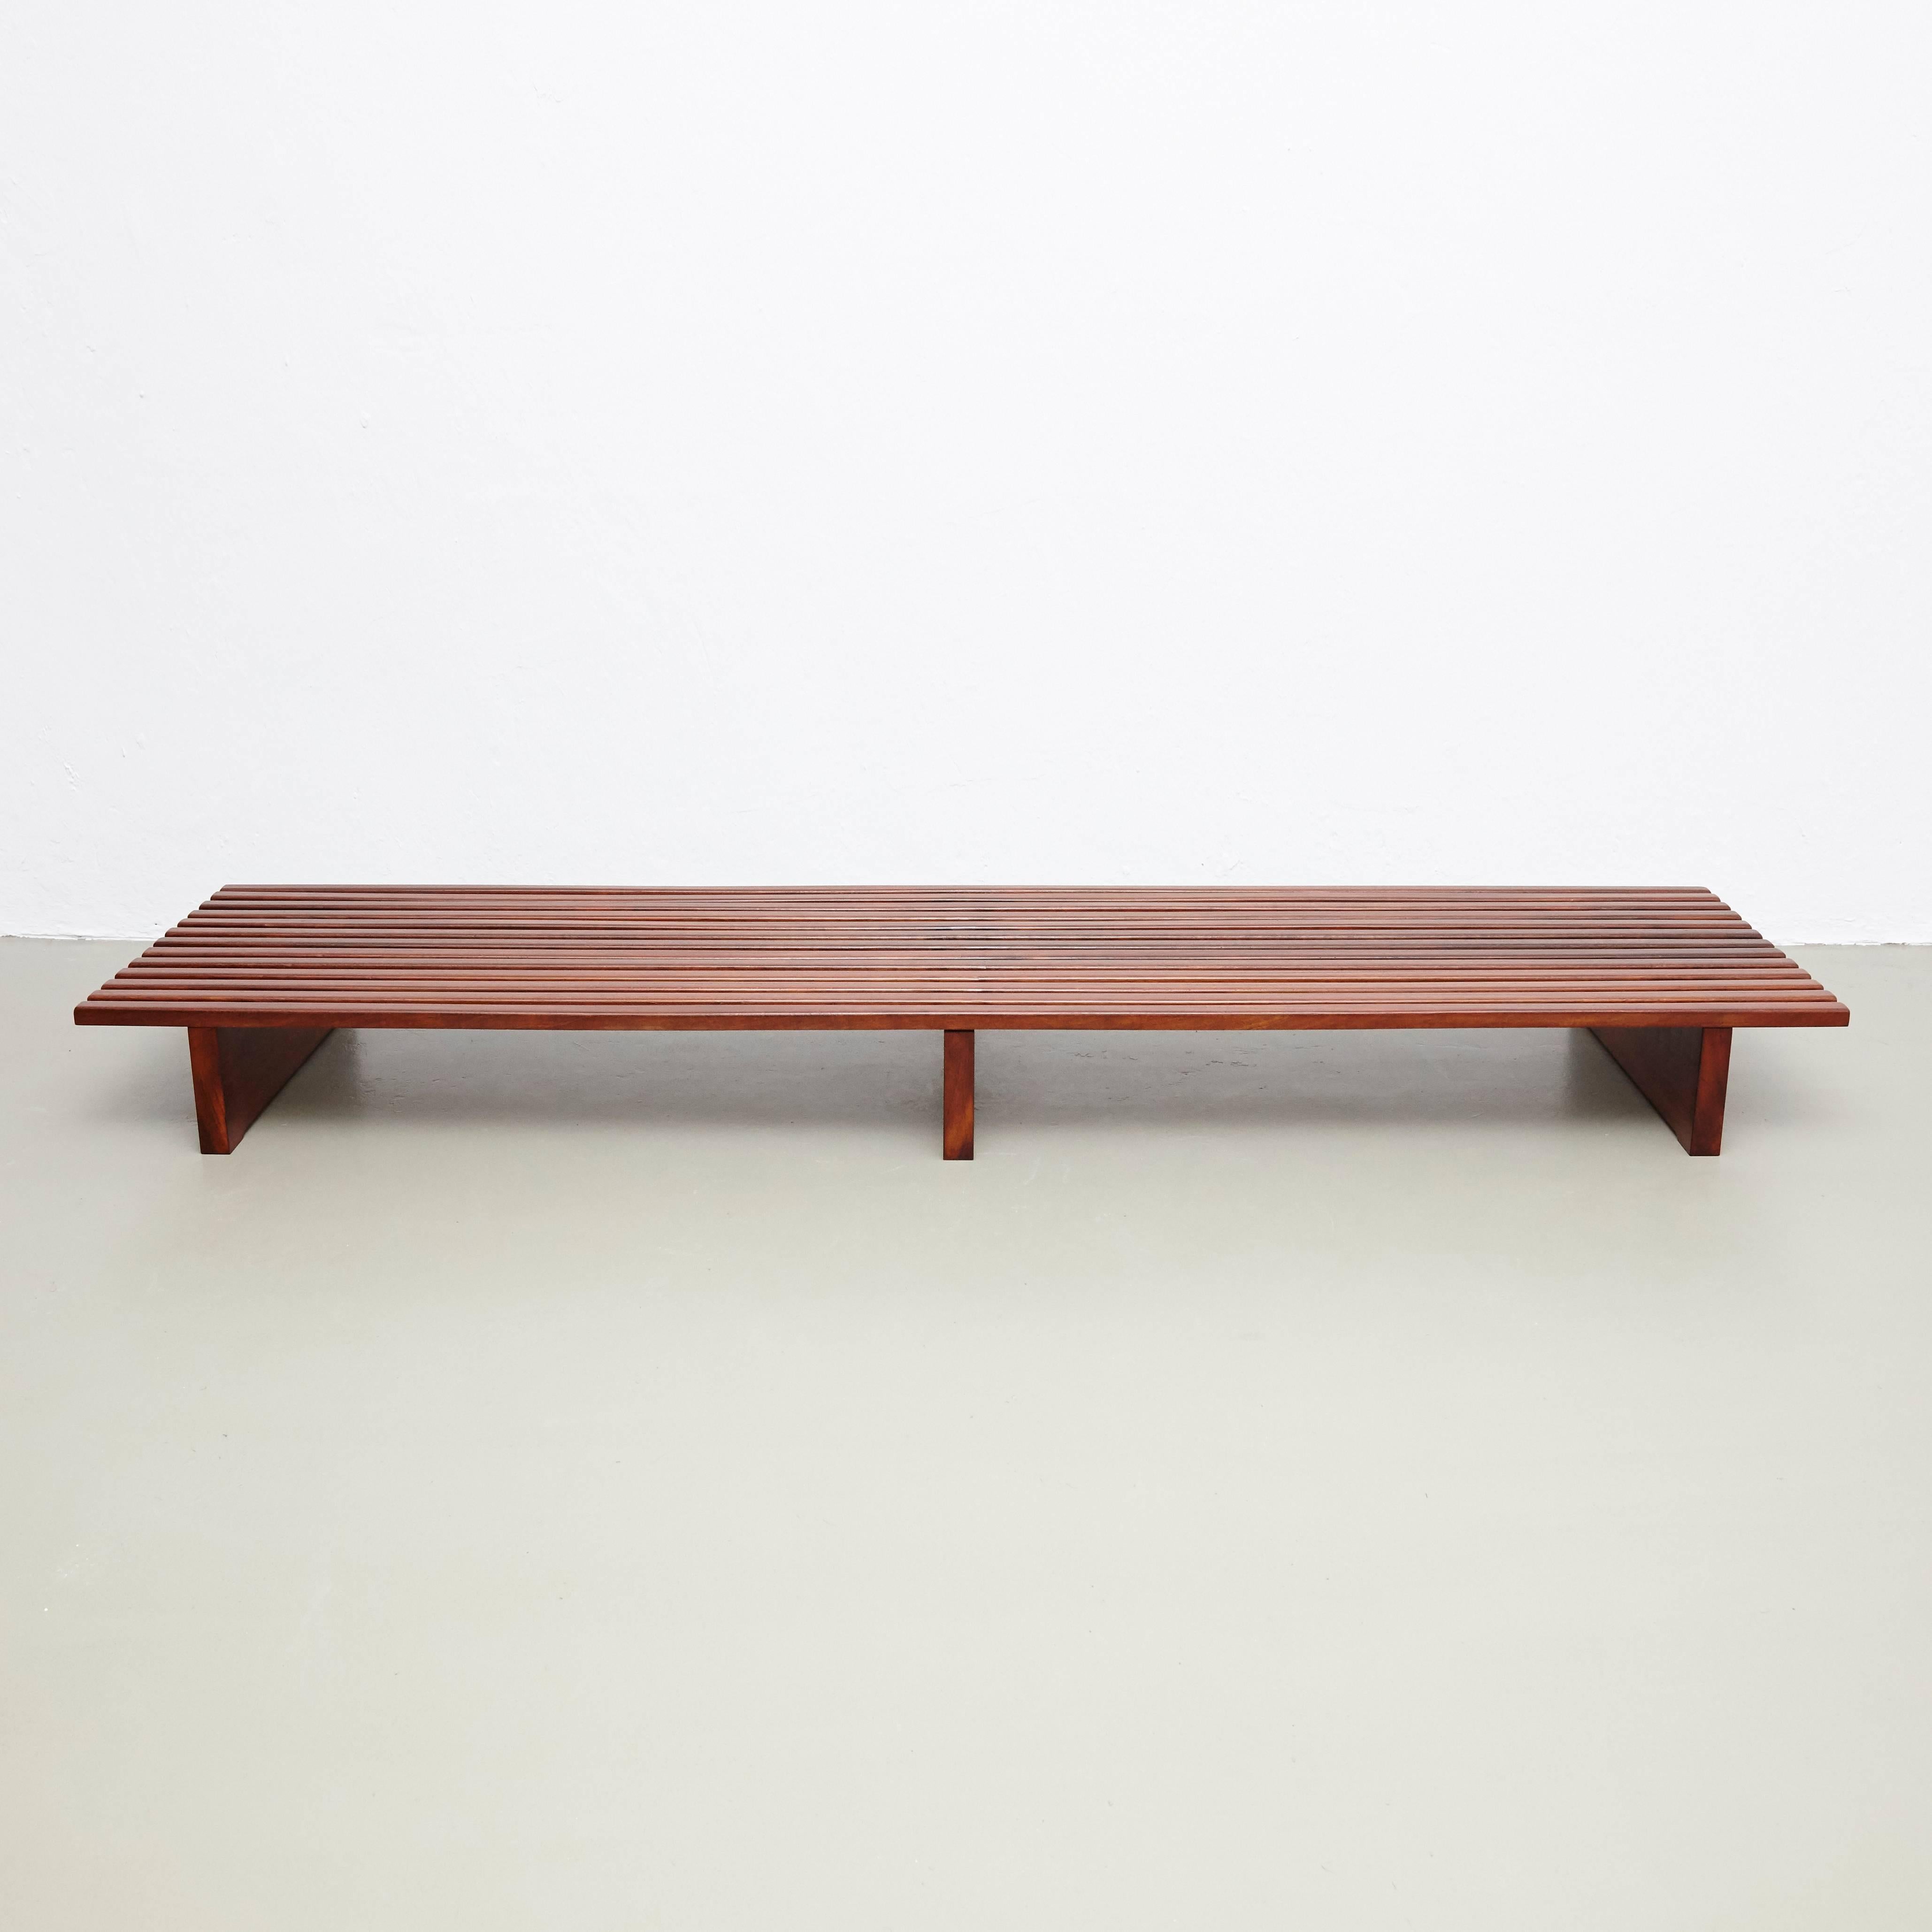 Bench designed by Charlotte Perriand, circa 1950.
This model is with 13 slats of wood.

Mahogany wood base and structure.

Wooden legs seems to be latter added by previous owner.

Provenance: Cansado, Mauritania (Africa).

In good original